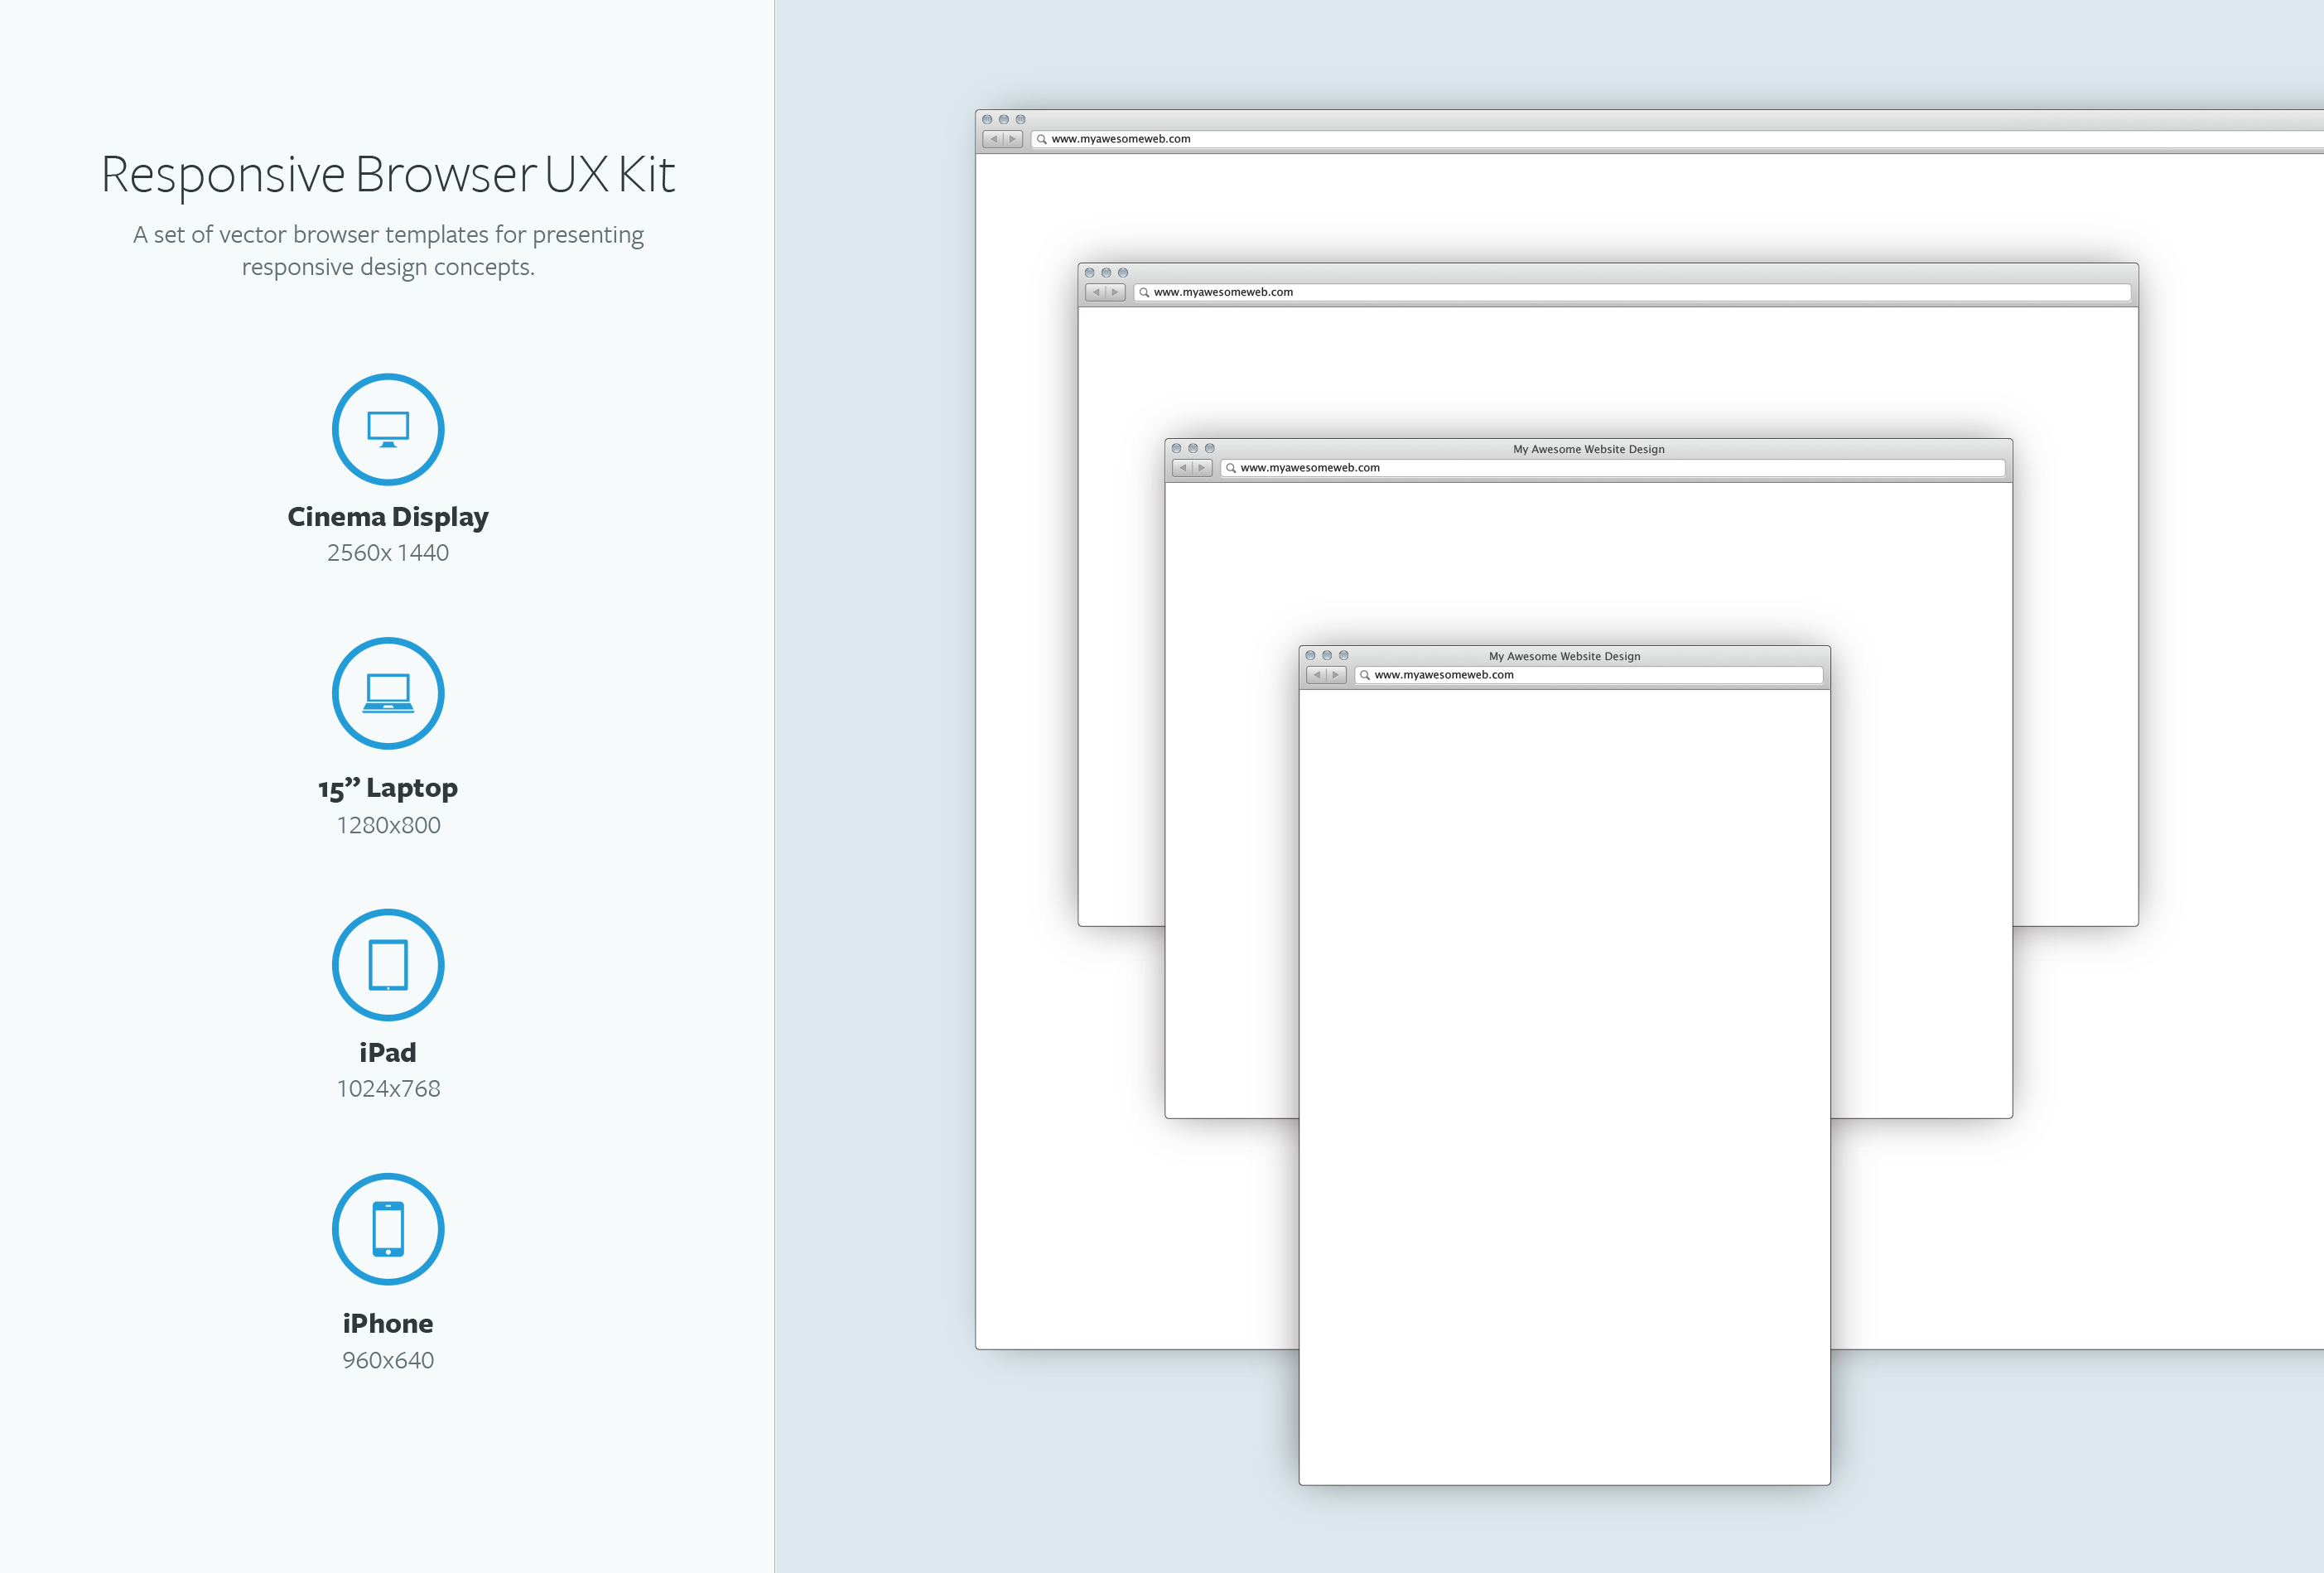 Vector Browser Templates UX Kit For Responsive Design